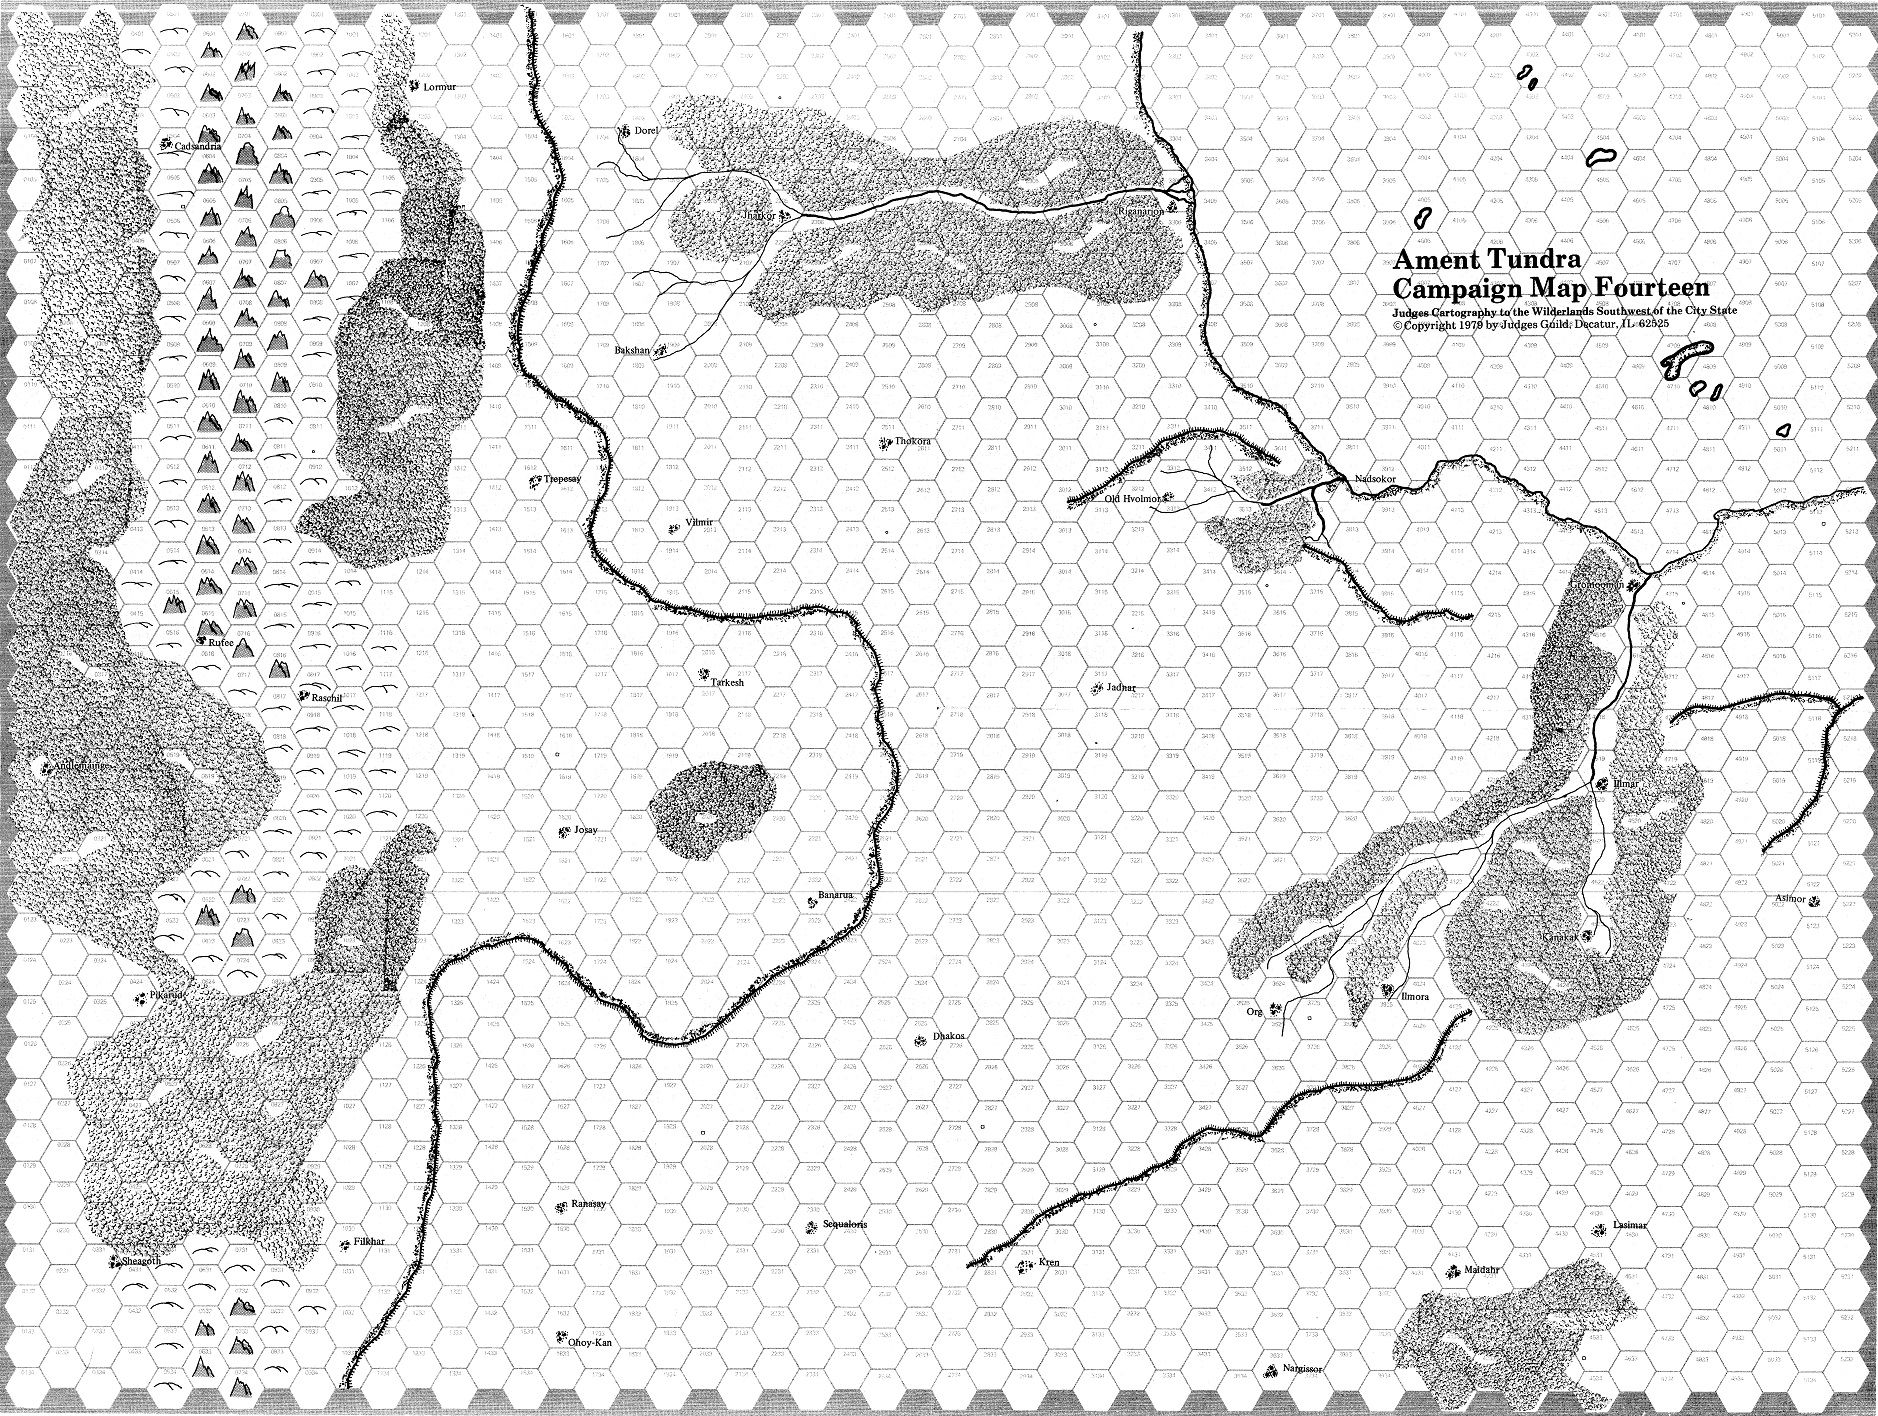 Image - Campaign Map 10